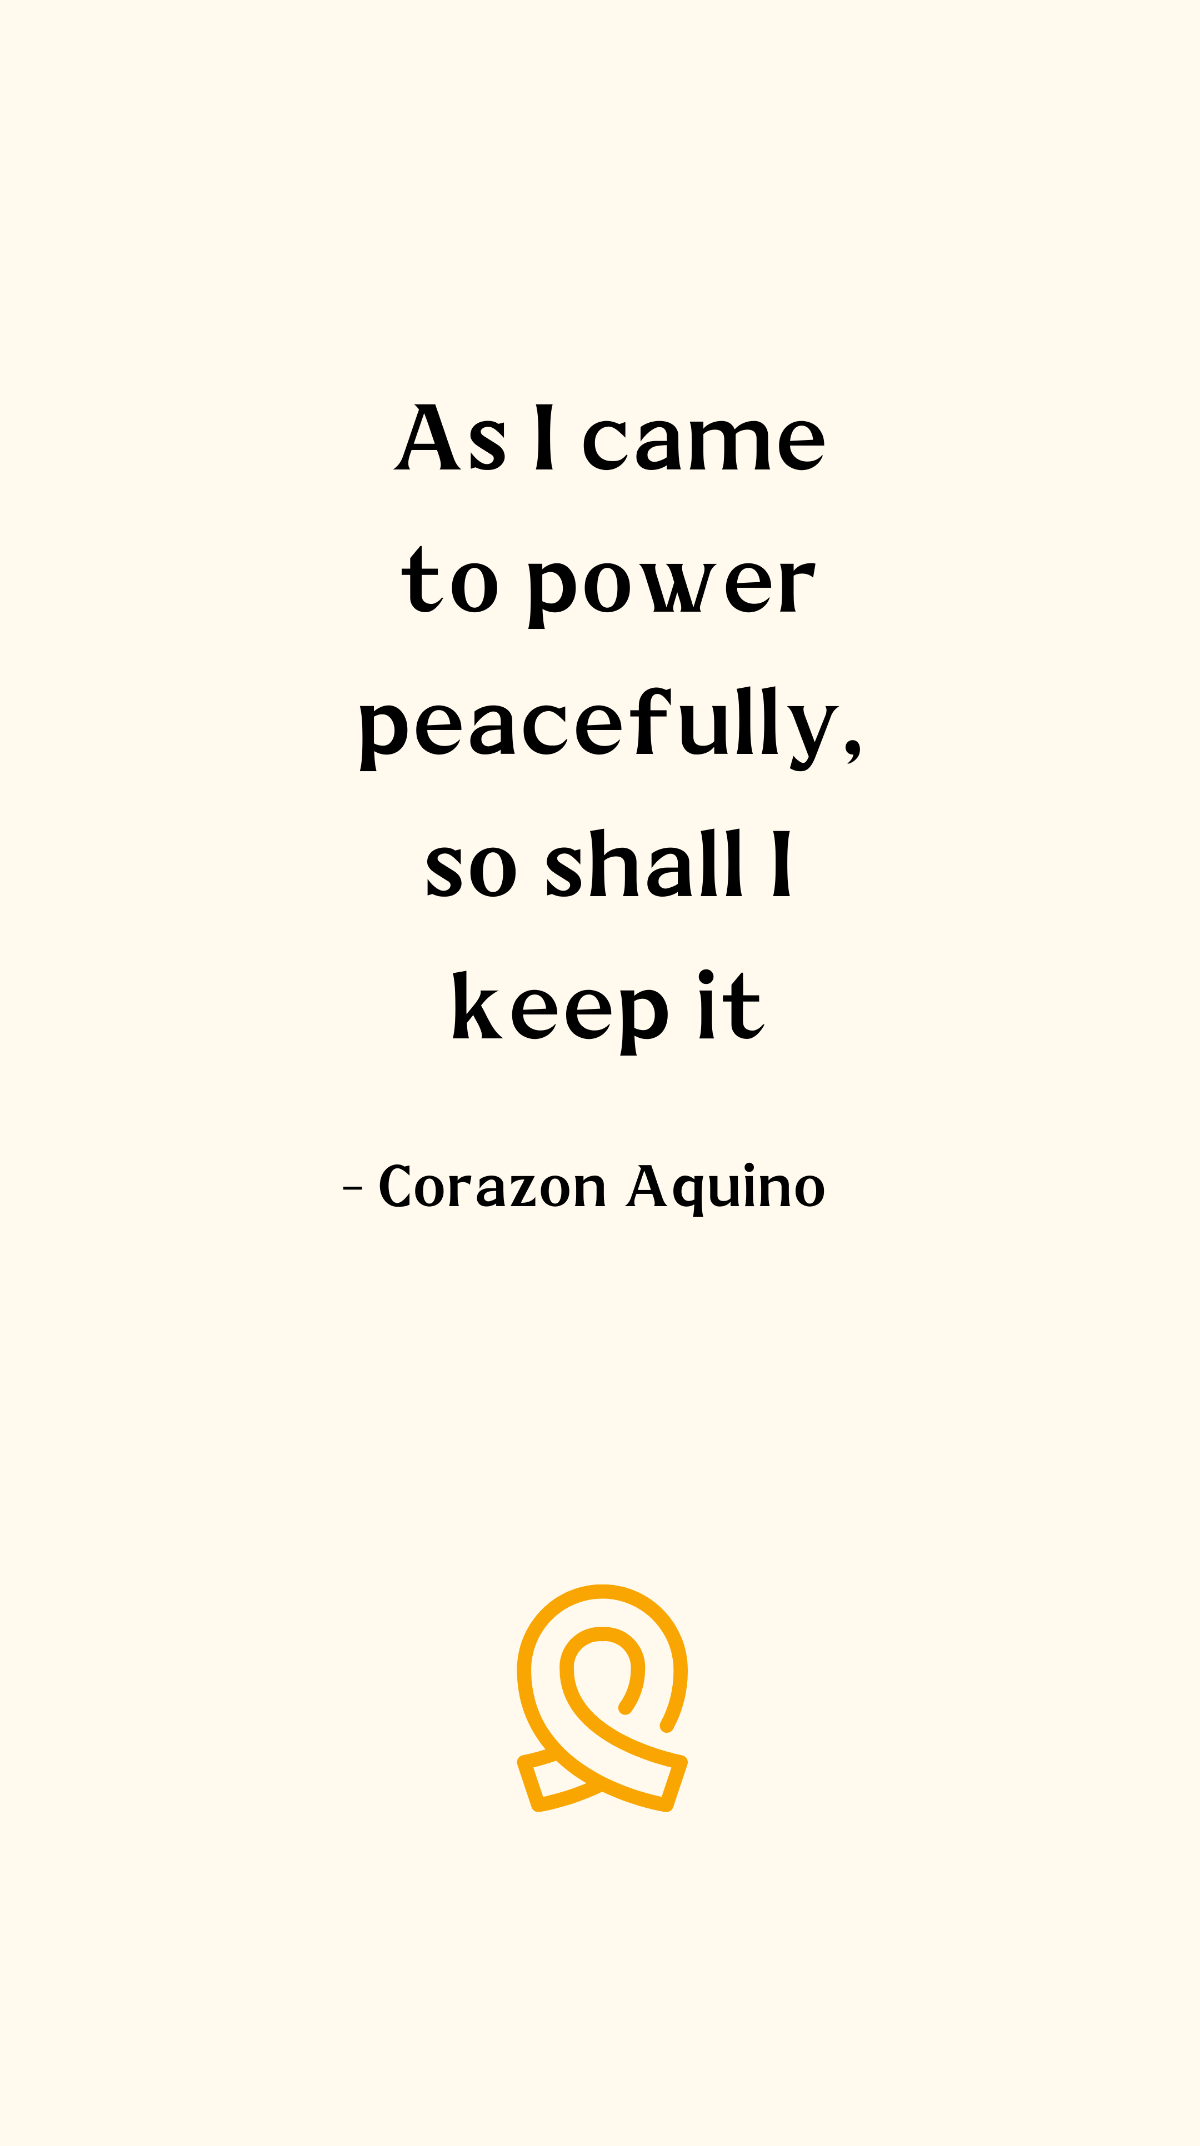 Free Corazon Aquino - As I came to power peacefully, so shall I keep it Template